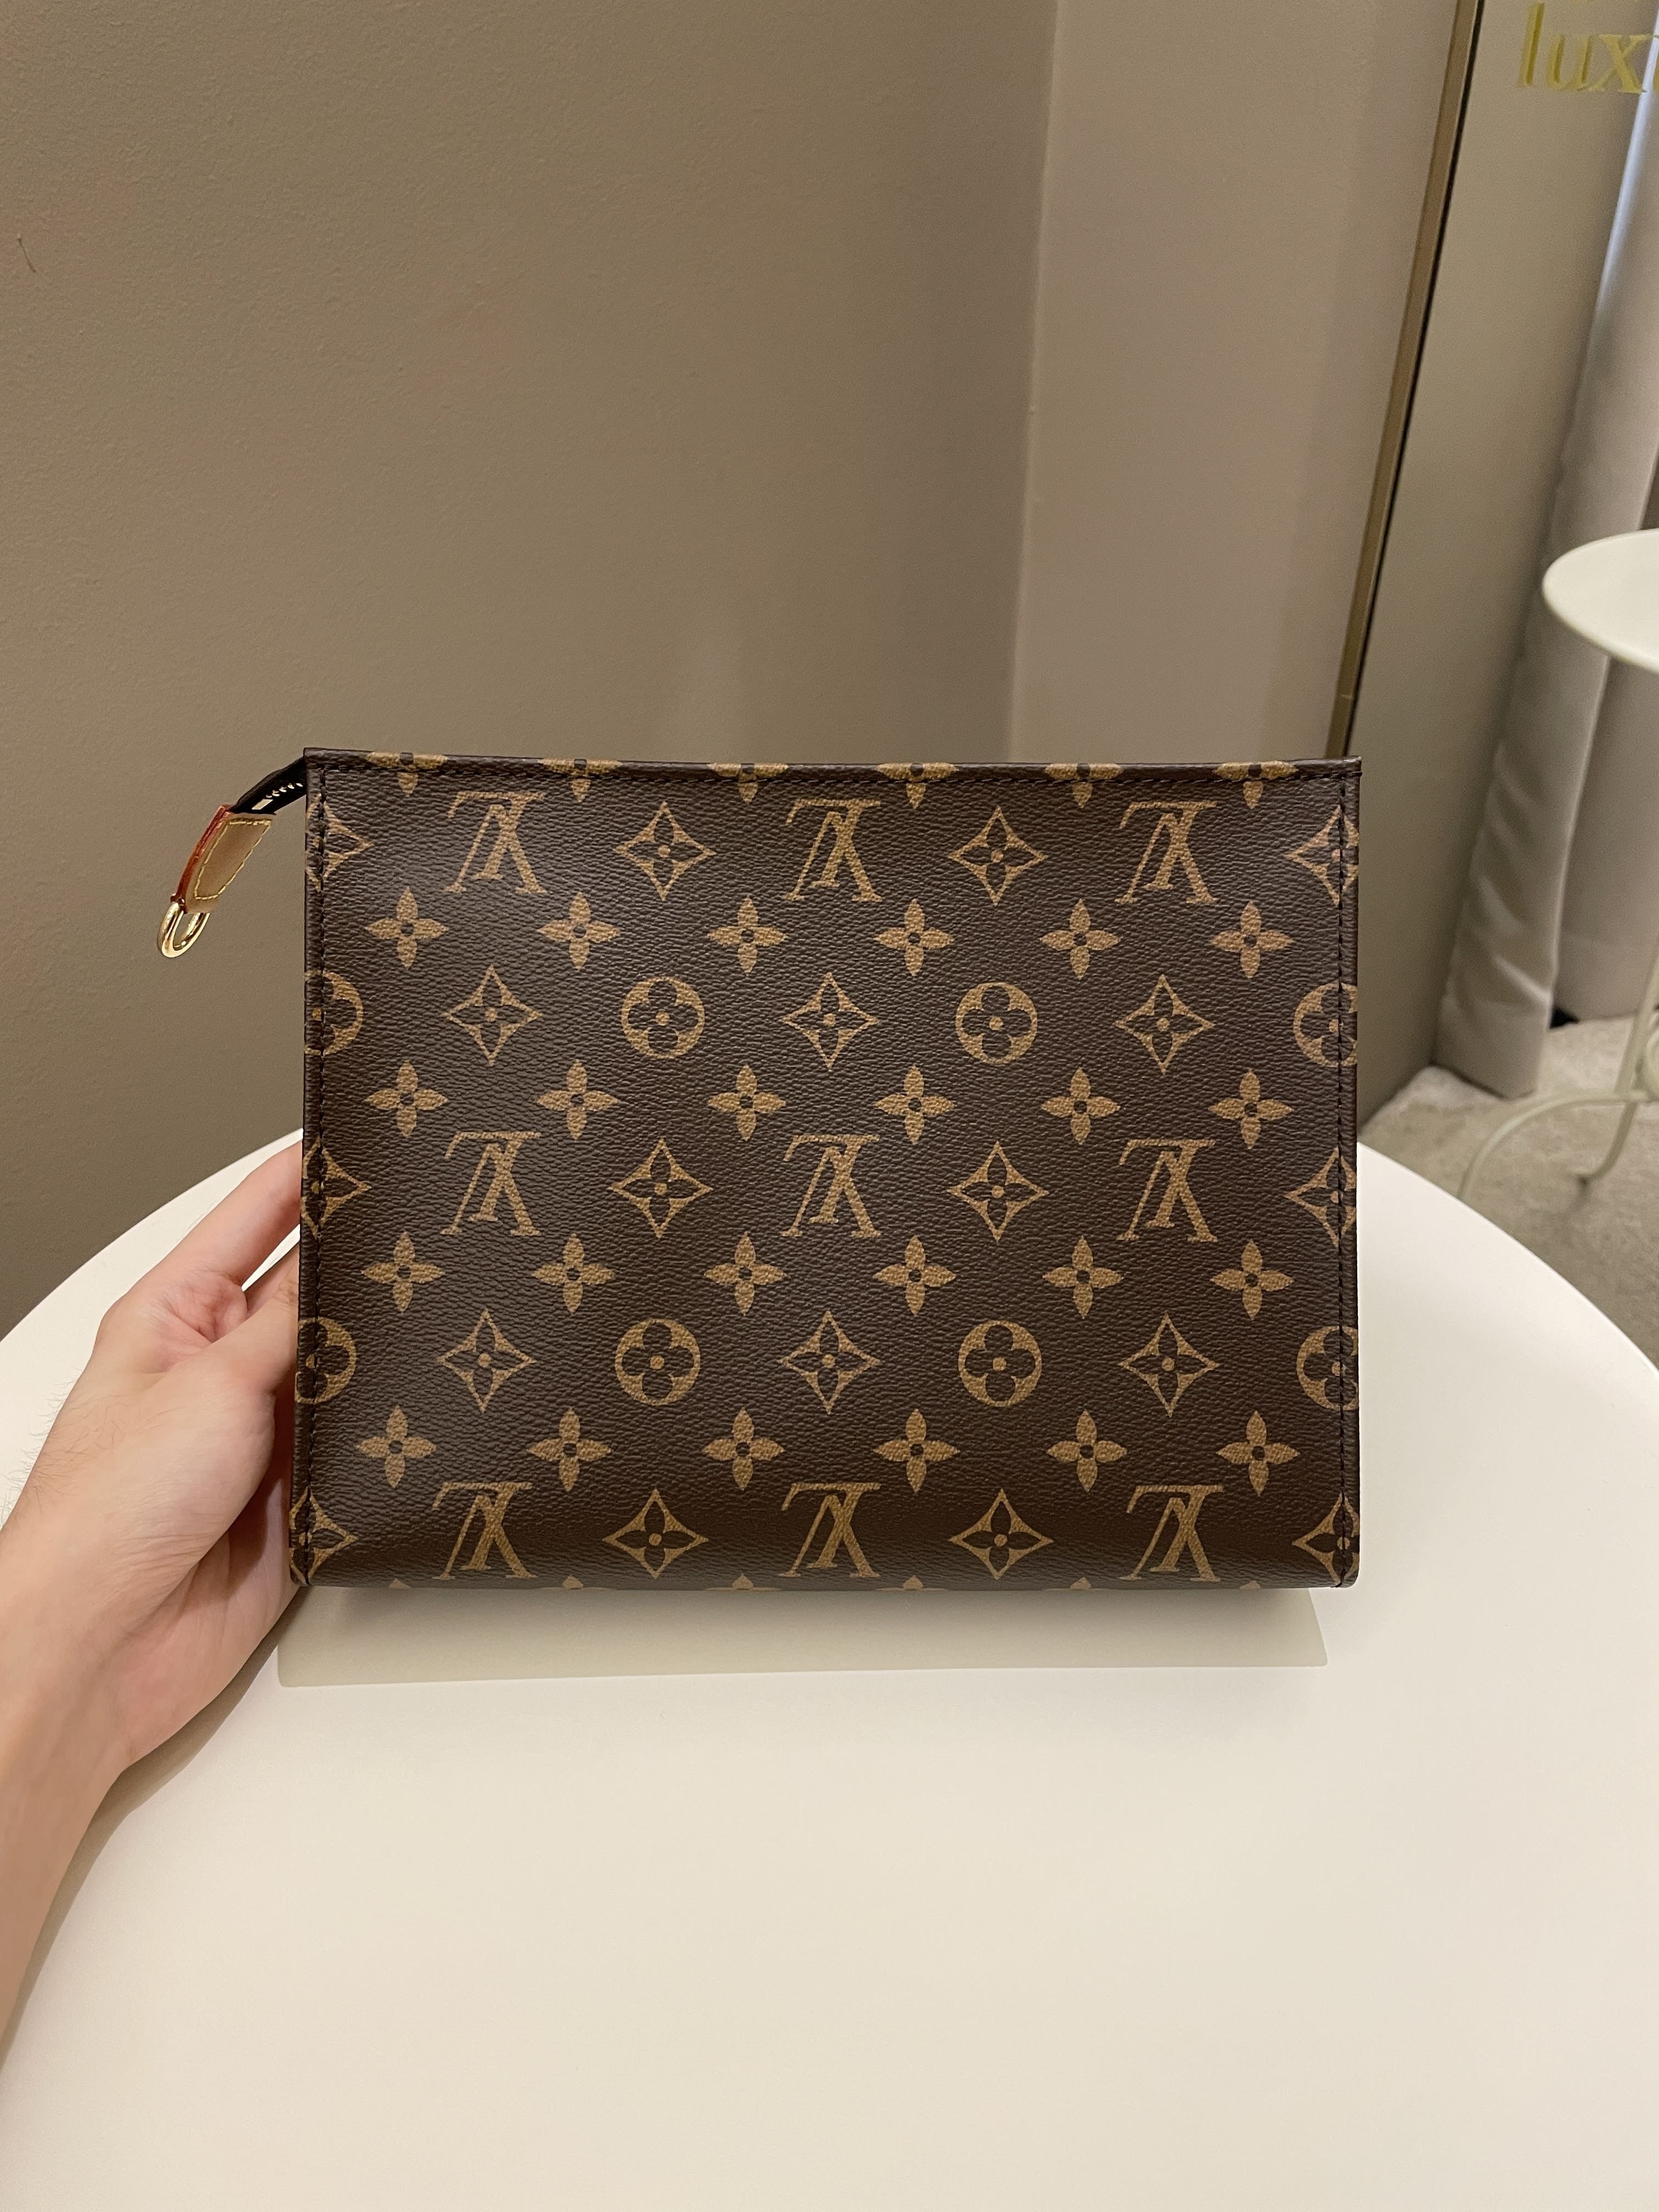 New Louis Vuitton Monogram Toiletry Clutch in Box For Sale at